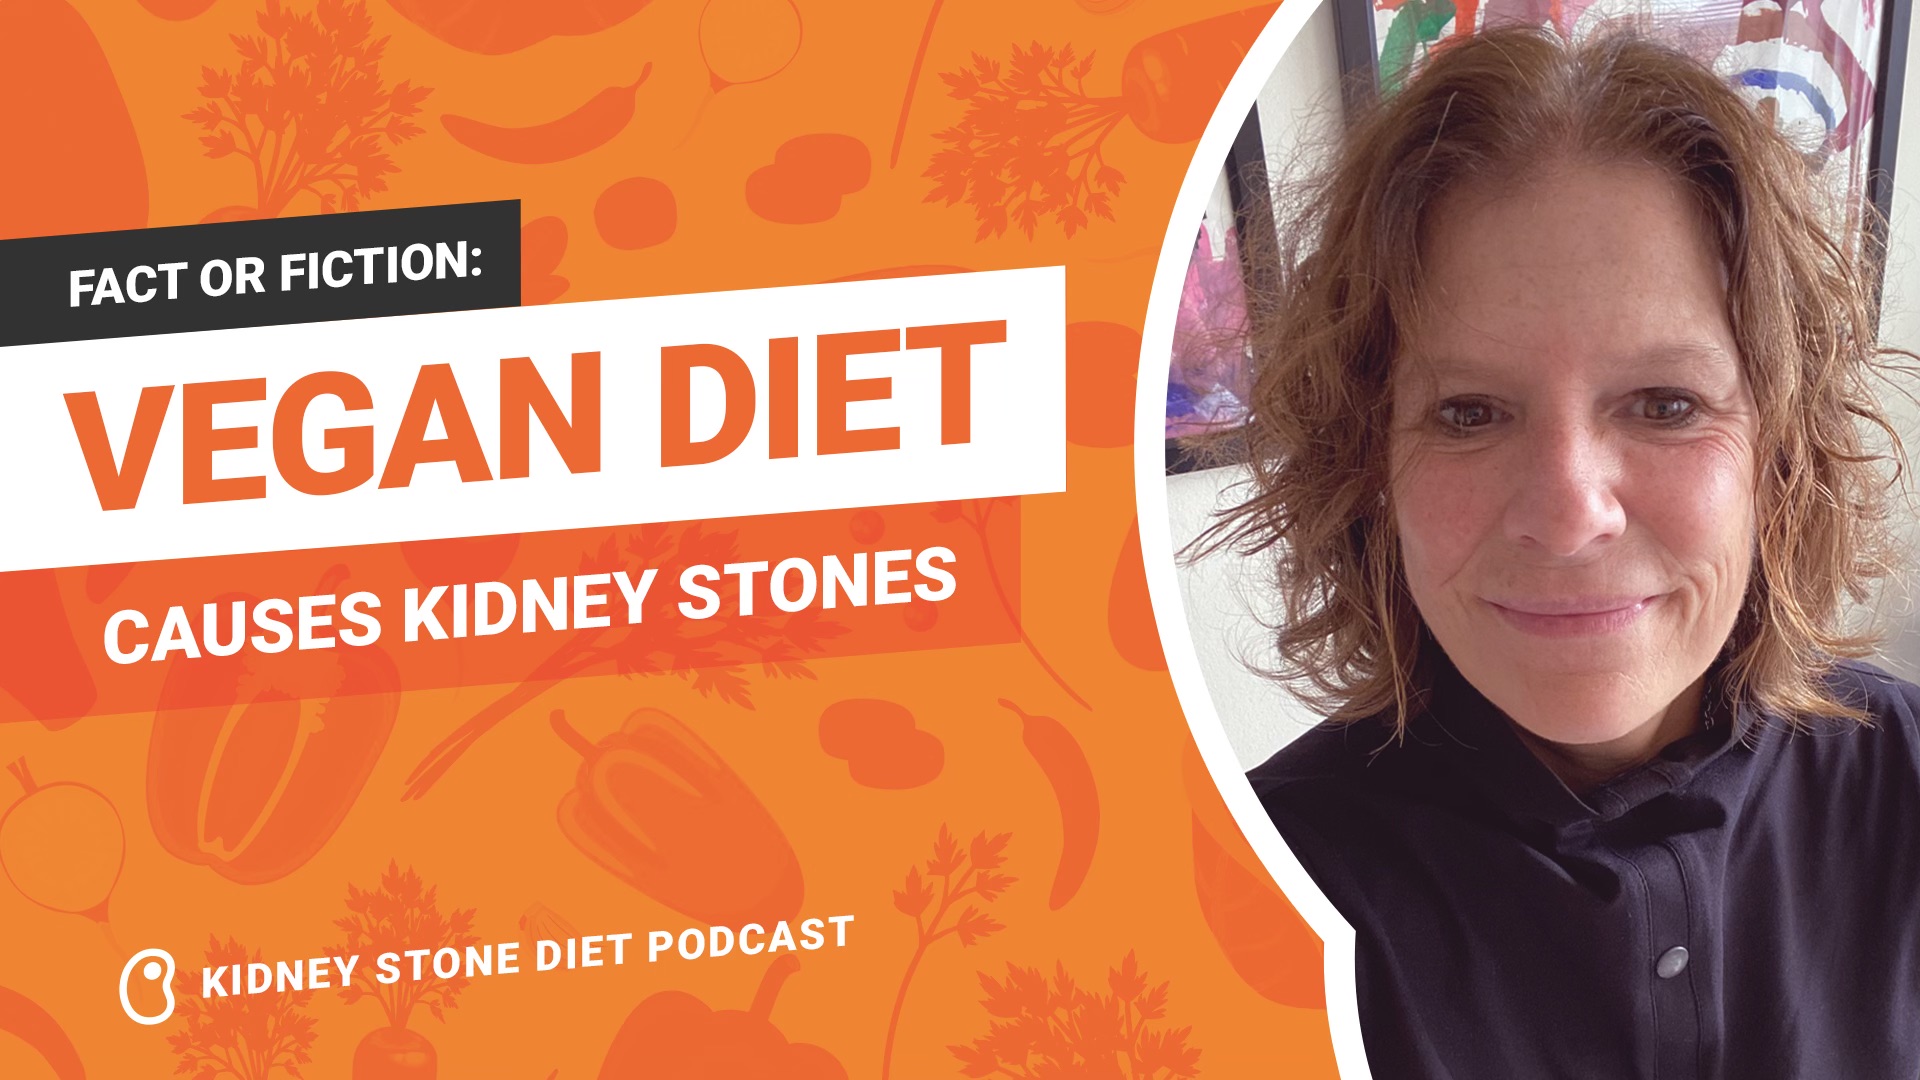 Fact or Fiction: Vegan diets cause kidney stones